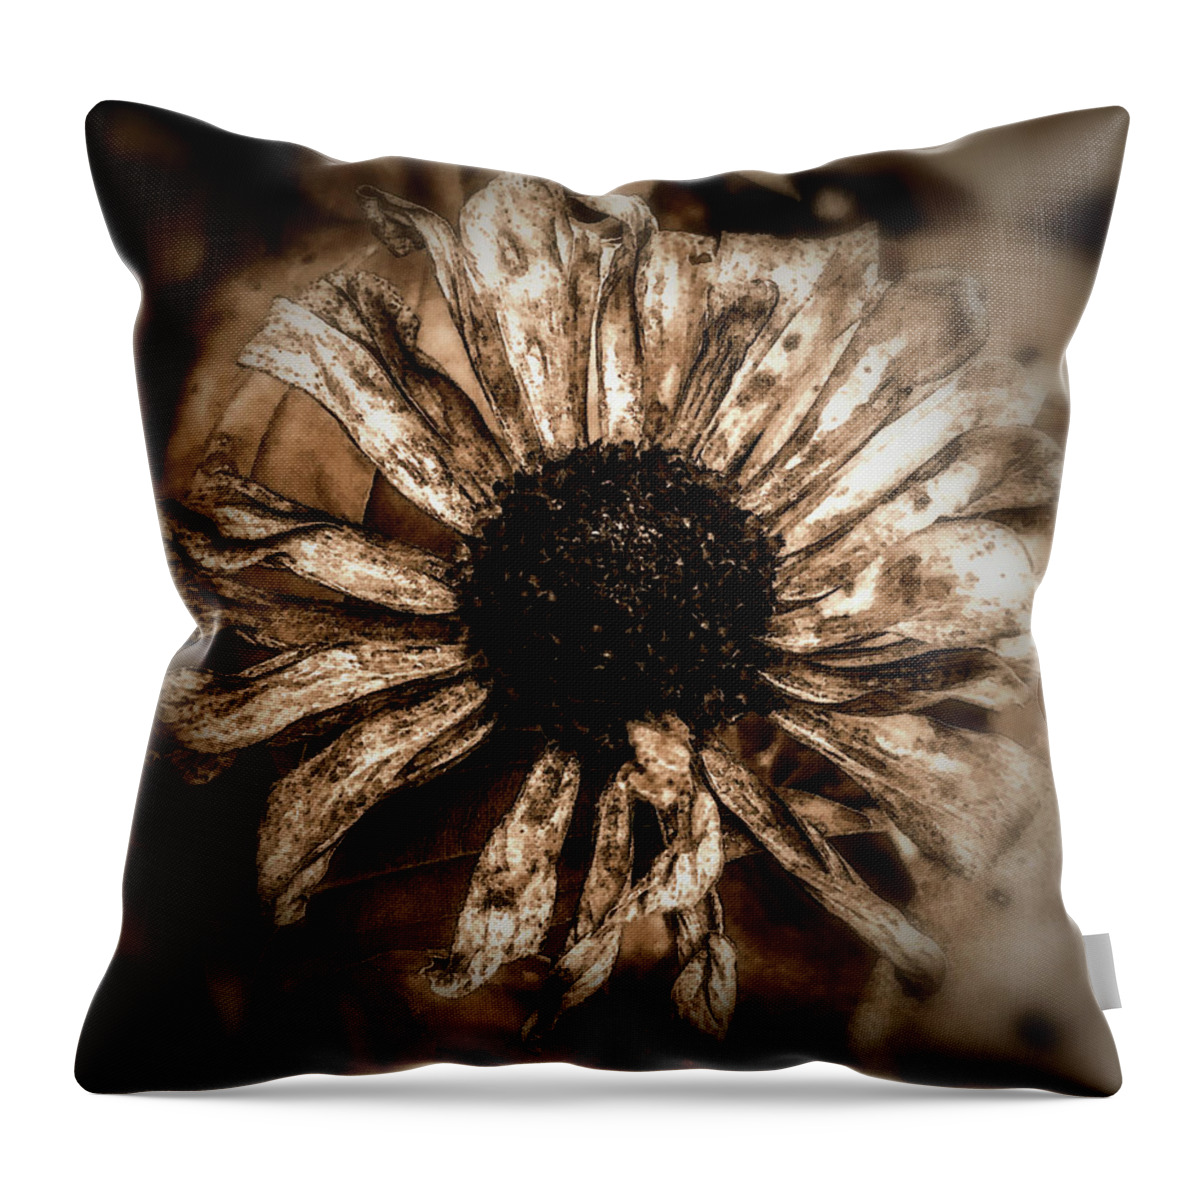  Throw Pillow featuring the pyrography Looking around-352 by Emilio Arostegui